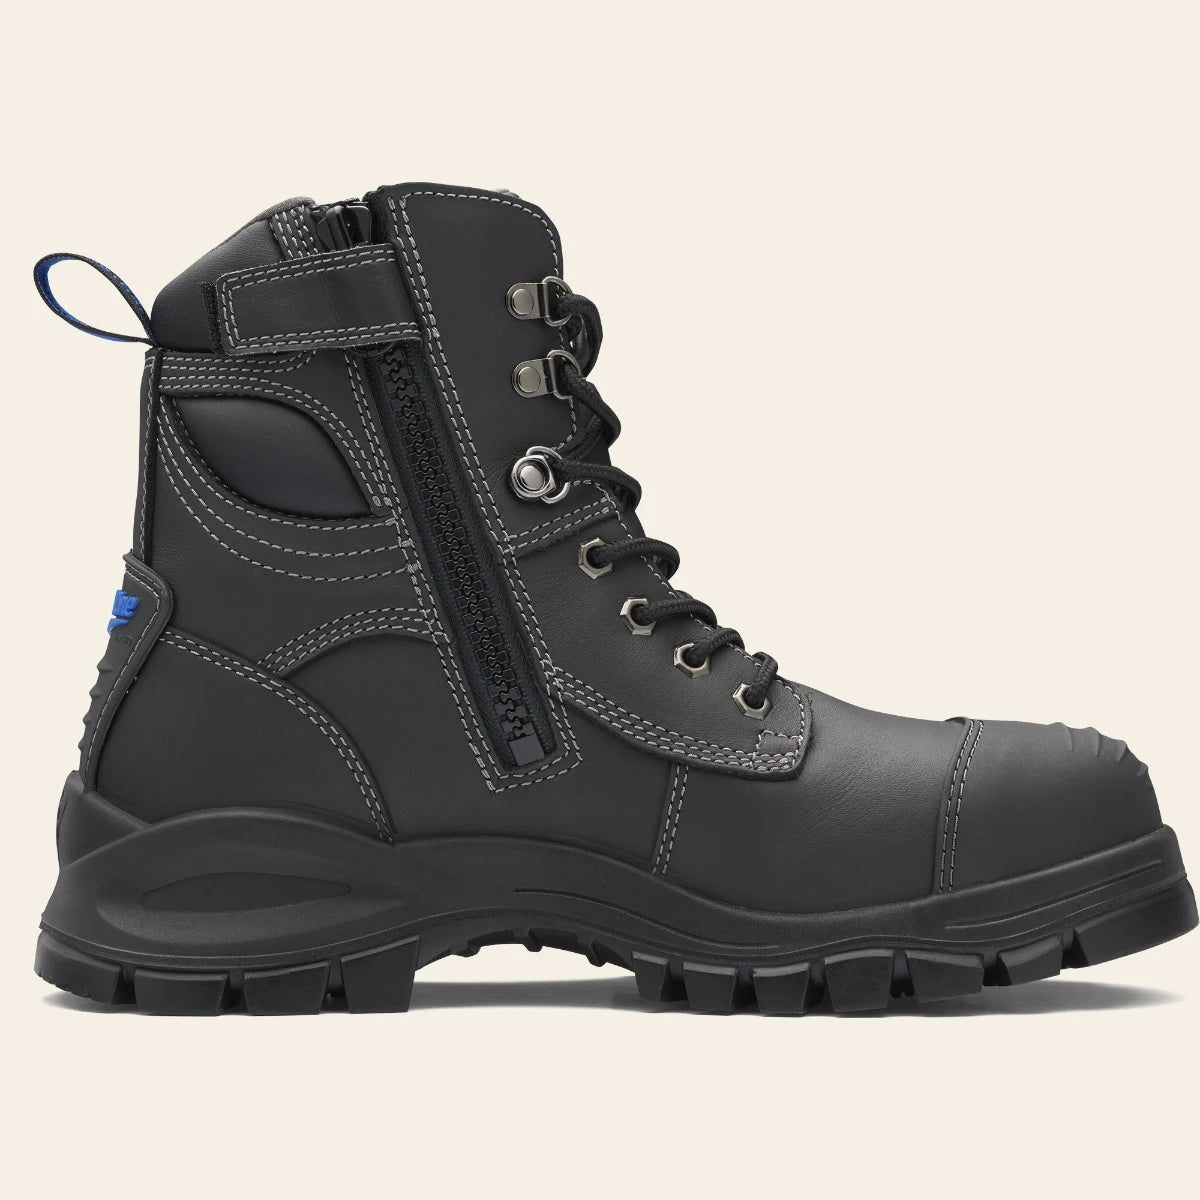 Blundstone 997 Black Zip Side 150mm Ankle Safety Boot